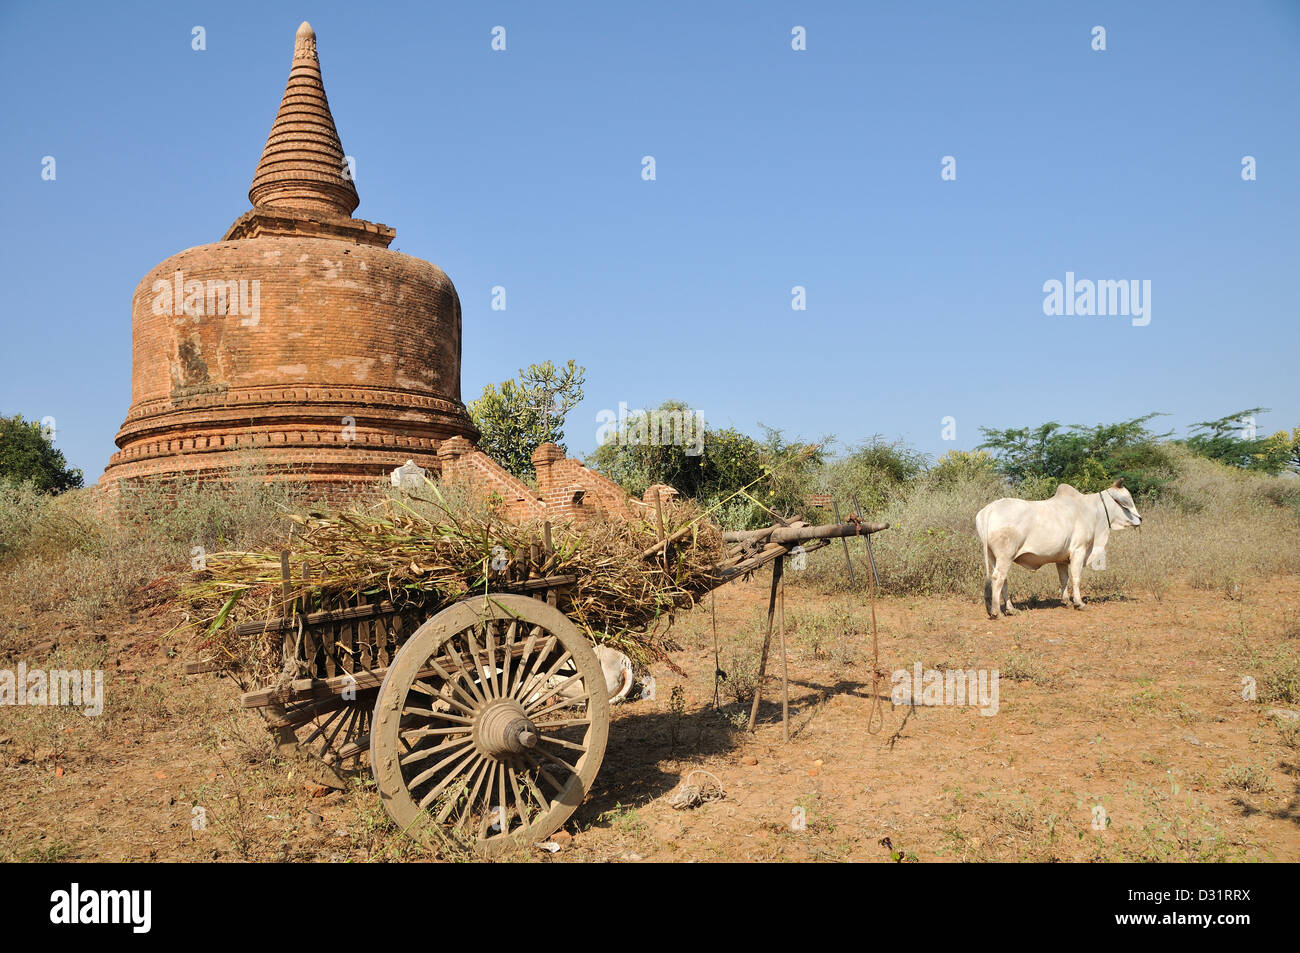 Oxcart in front of Stupa, Historical Site of Bagan, Burma, Myanmar Stock Photo